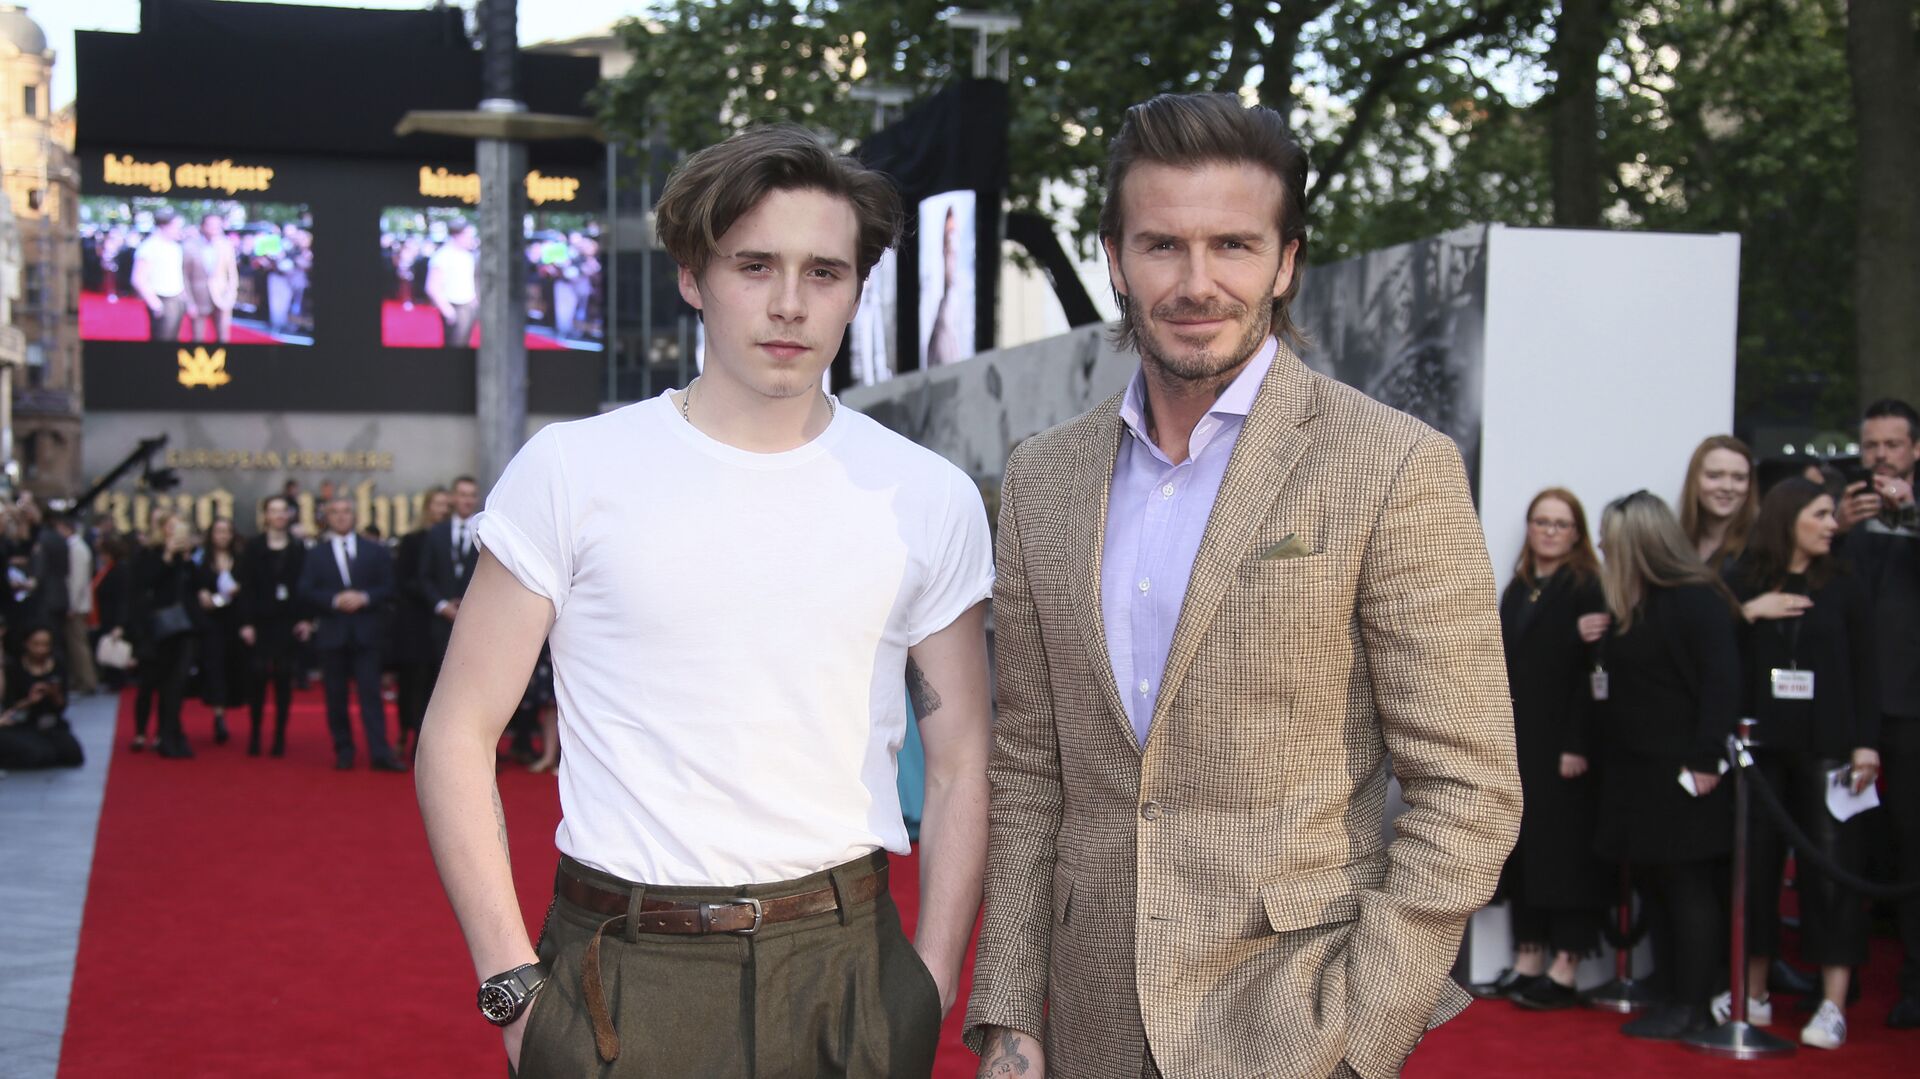 Actor David Beckham, right, poses with his son Brooklyn Beckham for photographers upon arrival at the premiere of the film 'King Arthur The Legend Of The Sword'', in London, Wednesday, May 10, 2017 - اسپوتنیک ایران  , 1920, 13.04.2022